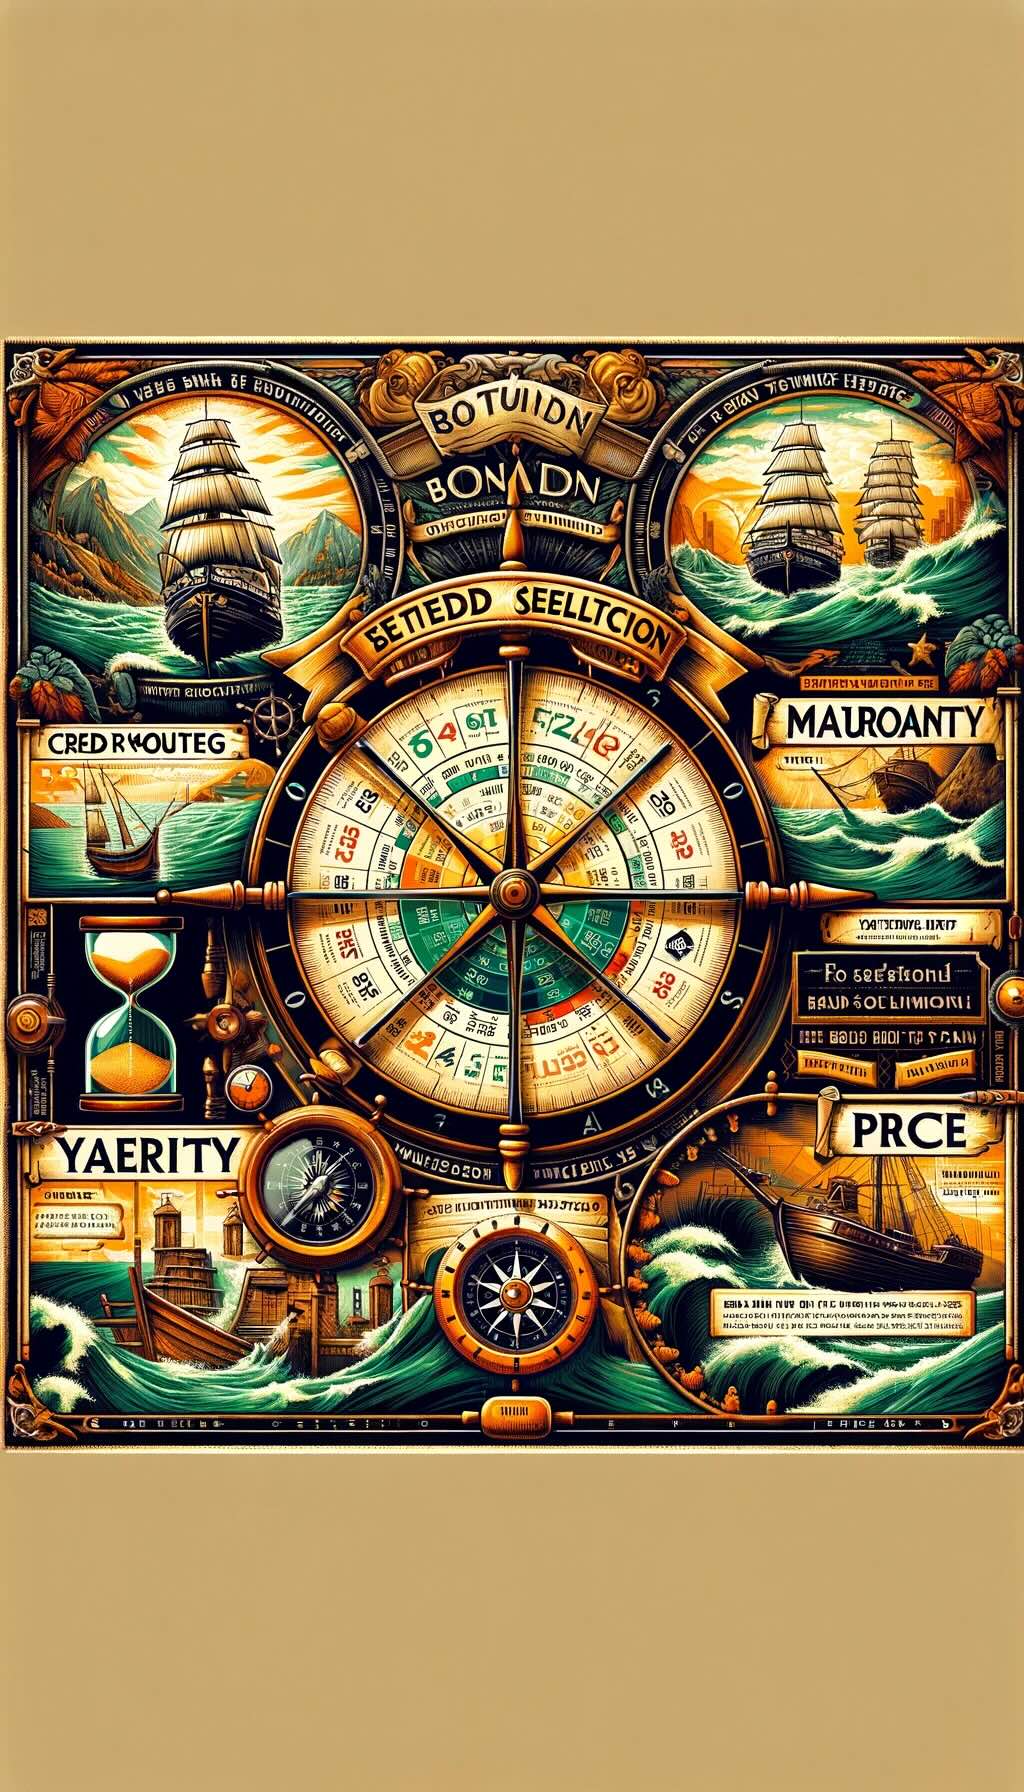 Complex process of selecting bonds into a navigational adventure on a vintage maritime map. It cleverly uses classic symbols to represent key factors in bond selection: a ship's seaworthiness certificate for credit ratings, marking the trustworthiness of bond issuers; a calendar or an hourglass for maturity, denoting the bond's lifespan; a speedometer or wind in the sails for yield, illustrating the growth rate of the investment; a treasure map for price, guiding towards bonds bought at par, discount, or premium; and ocean currents and weather patterns for the interest rate environment, affecting the investment's journey. This richly detailed and colorful artwork invites viewers to navigate the seas of investment with these critical factors as their compass, emphasizing the strategic planning required to sail successfully through the bond market.